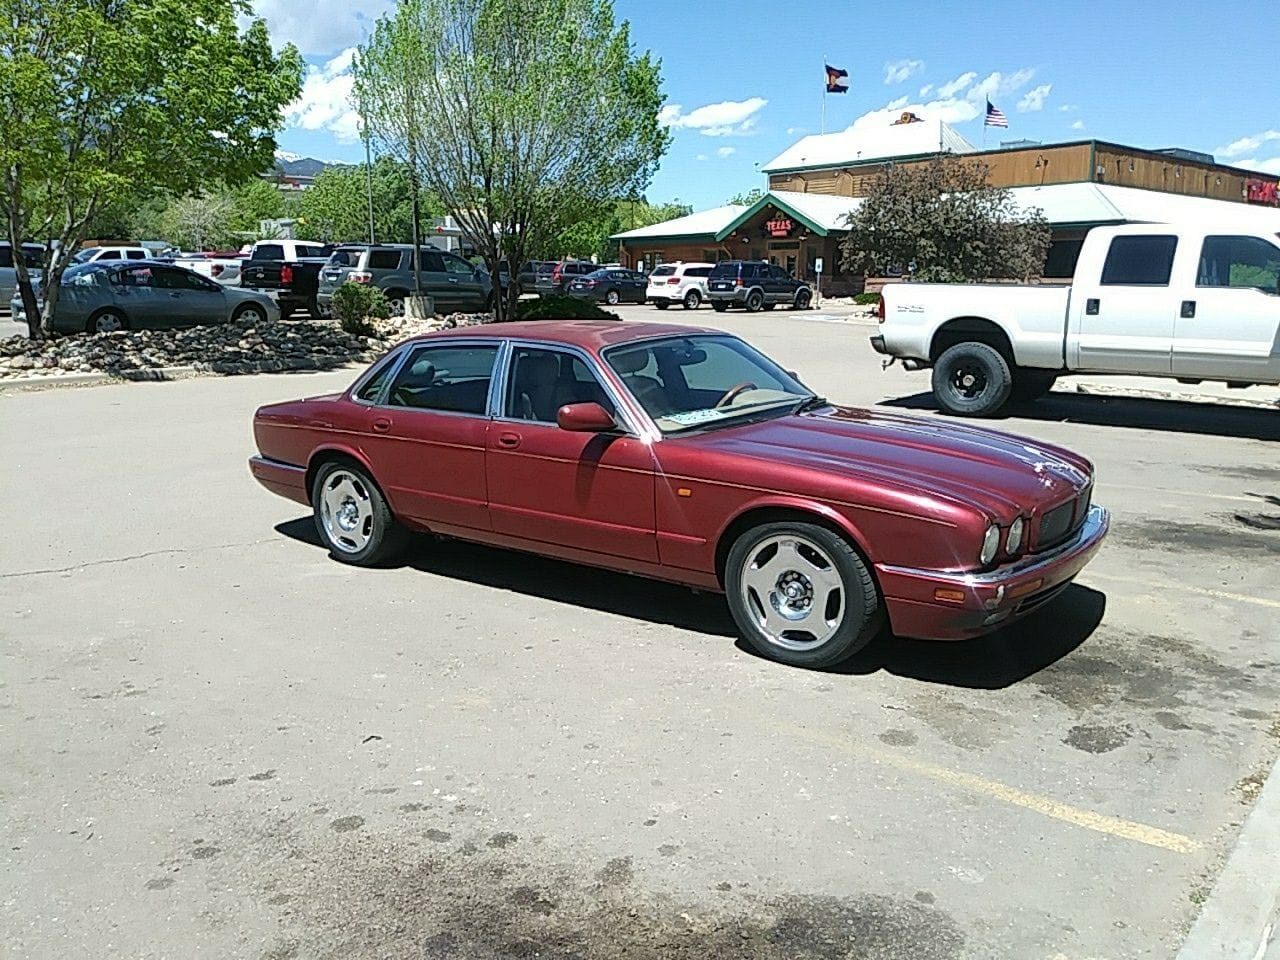 1997 Jaguar XJR - Feeler Post - XJR could use a better home than I can afford to give it. - Used - VIN SAJPX1148VC789538 - 181,026 Miles - 6 cyl - 2WD - Automatic - Sedan - Red - Colorado Springs, CO 80905, United States